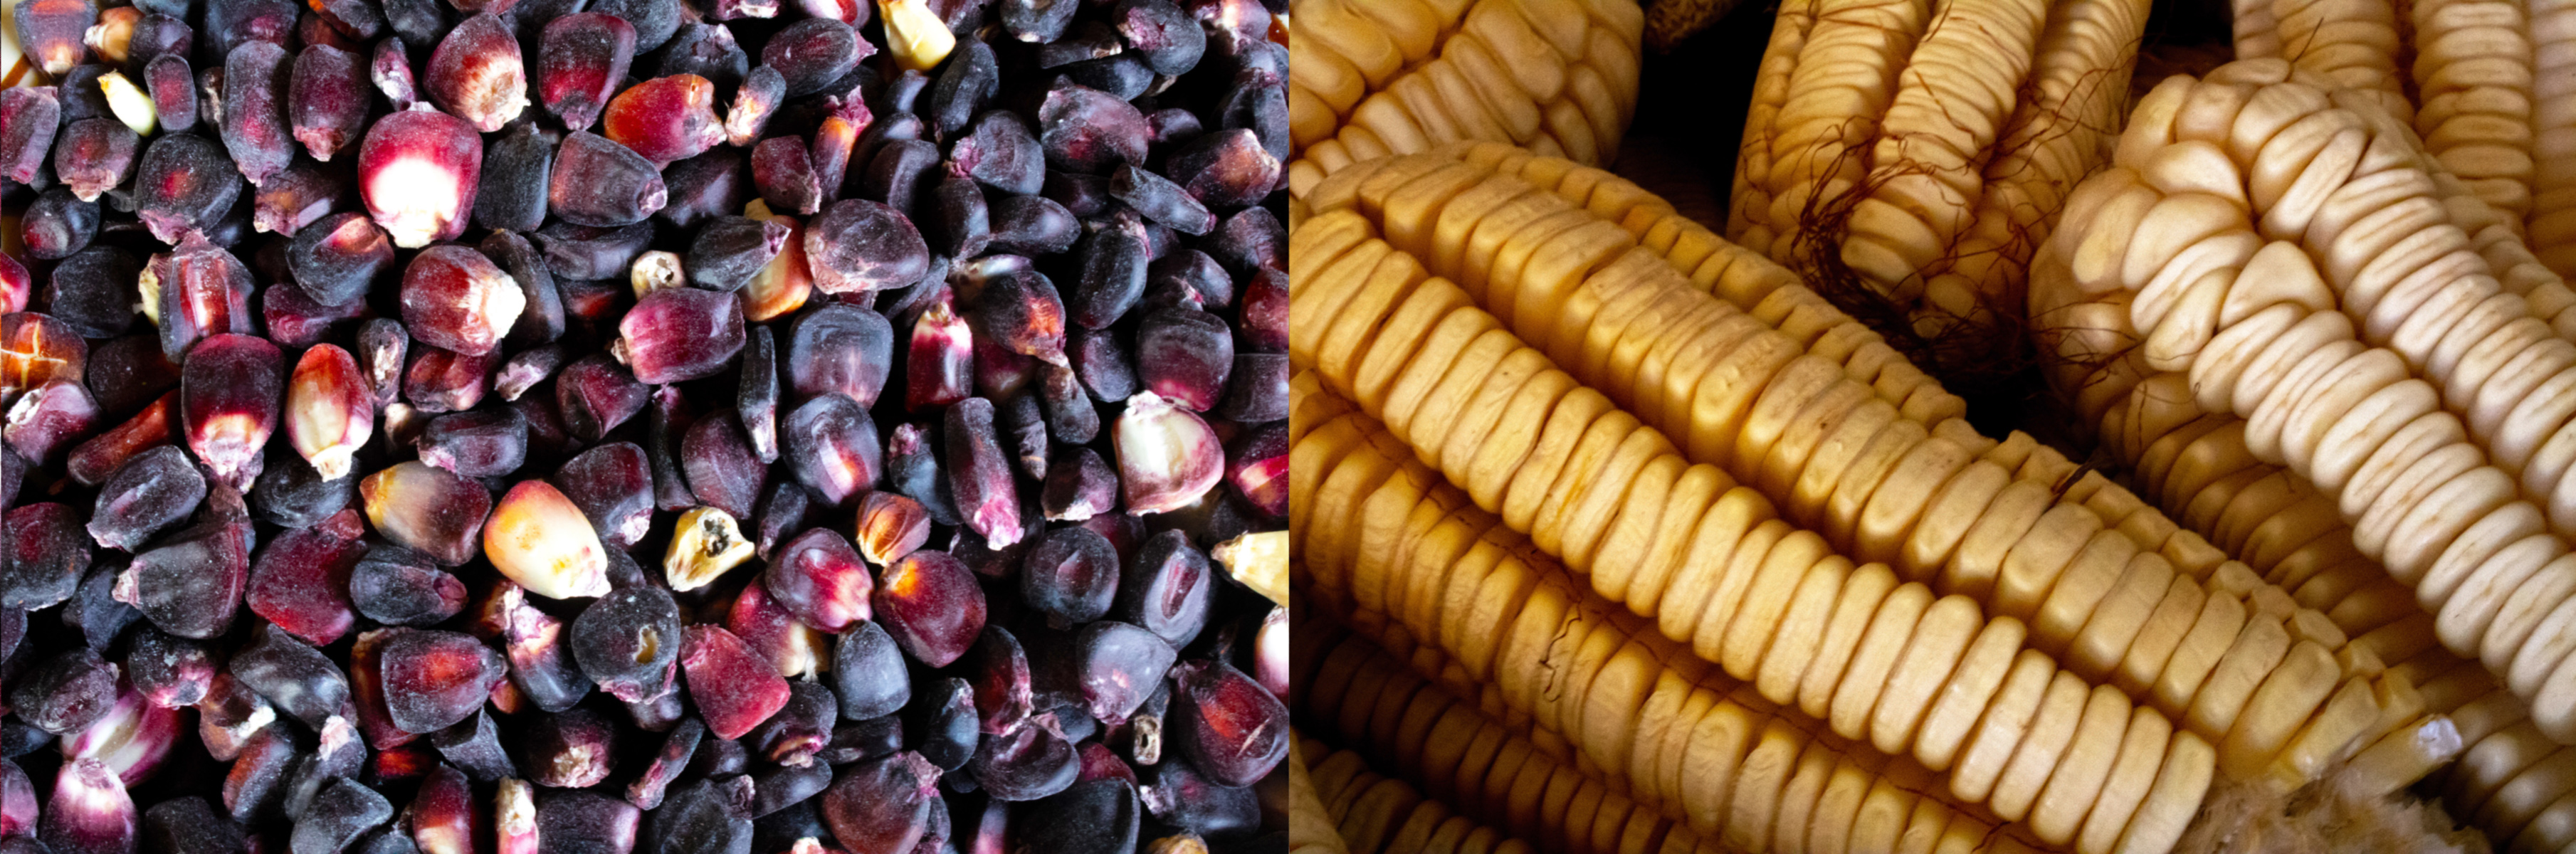 Maíz colorado (left), or red maize, is an important part of the family’s diet. The family’s Ancho maize (right) has characteristically wide and flat kernels, and is a key ingredient of the pozole stew. (Photo: E. Orchardson/CIMMYT)